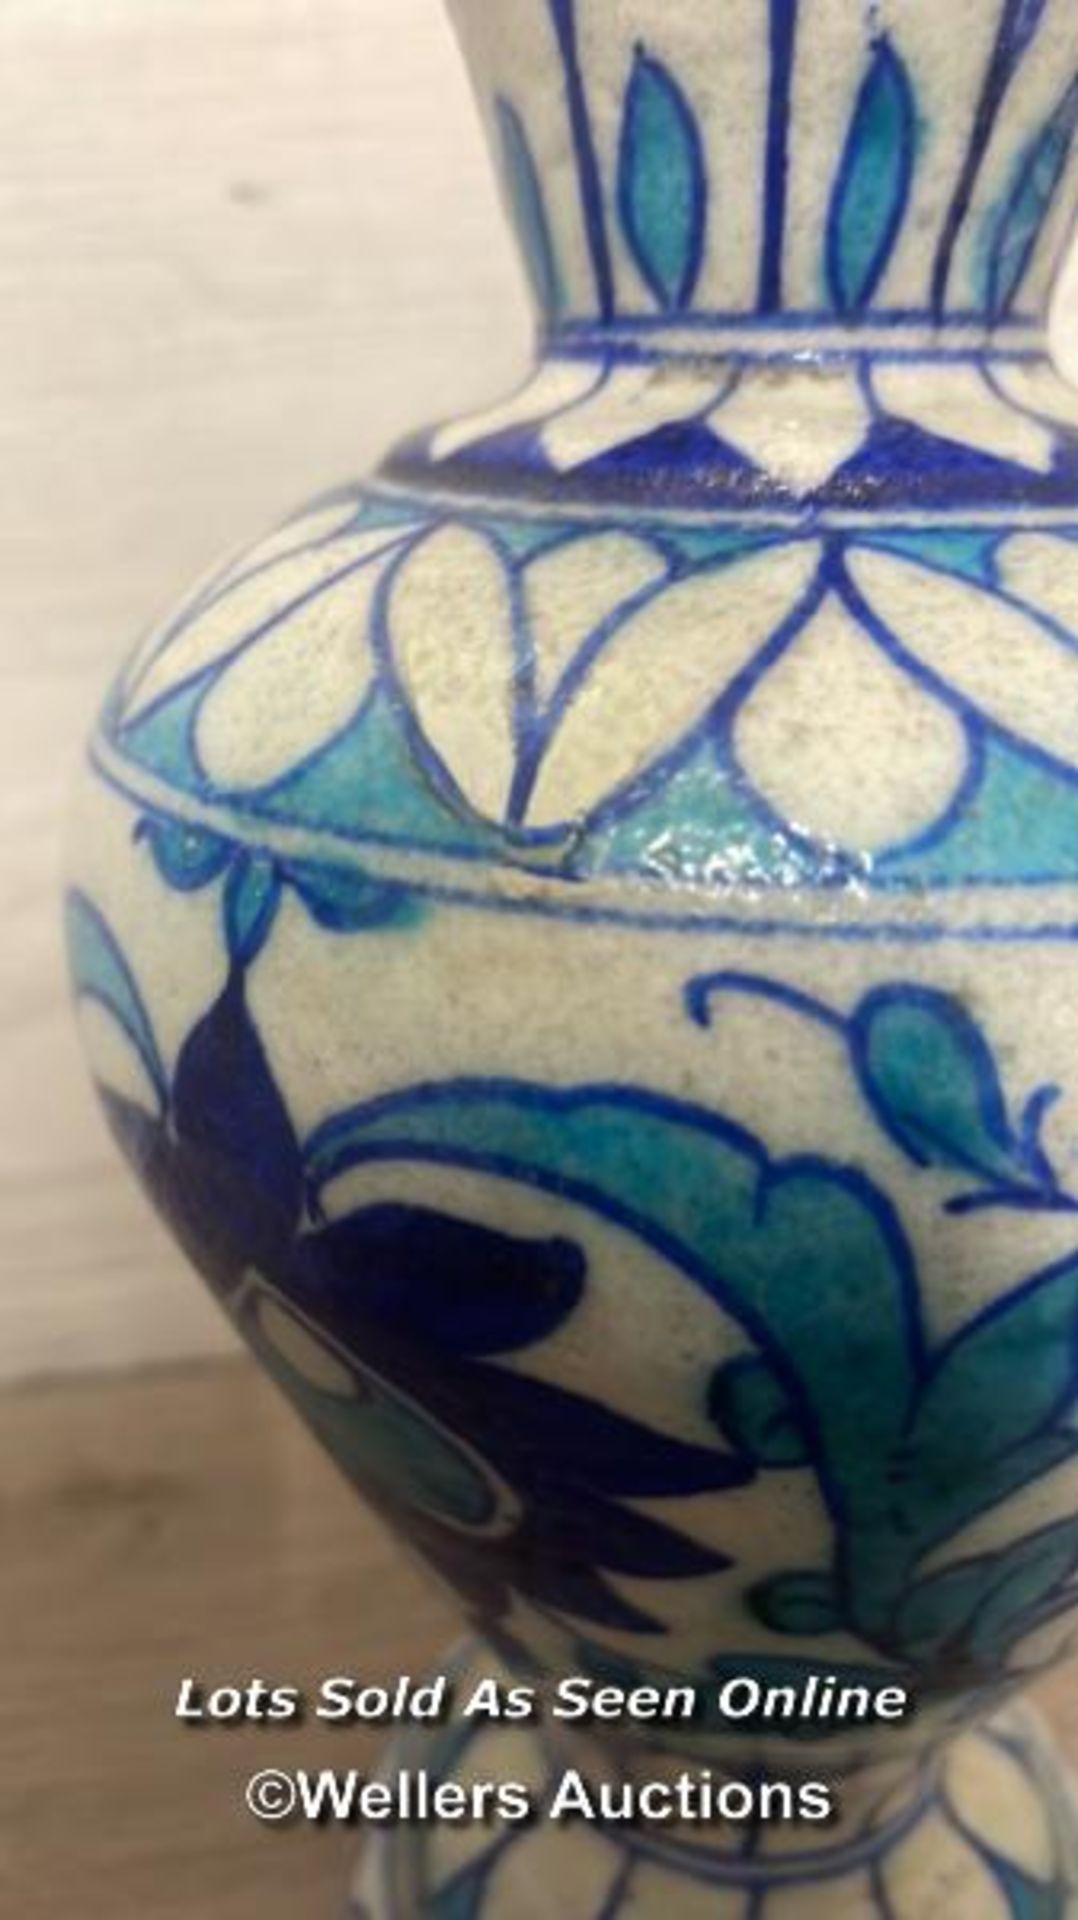 TWO SIMILAR MULTAN POTTERY VASES FROM PAKISTAN, HAND PAINTED BLUE & TURQUOISE FOLIAGE AND FLOWER - Bild 10 aus 15